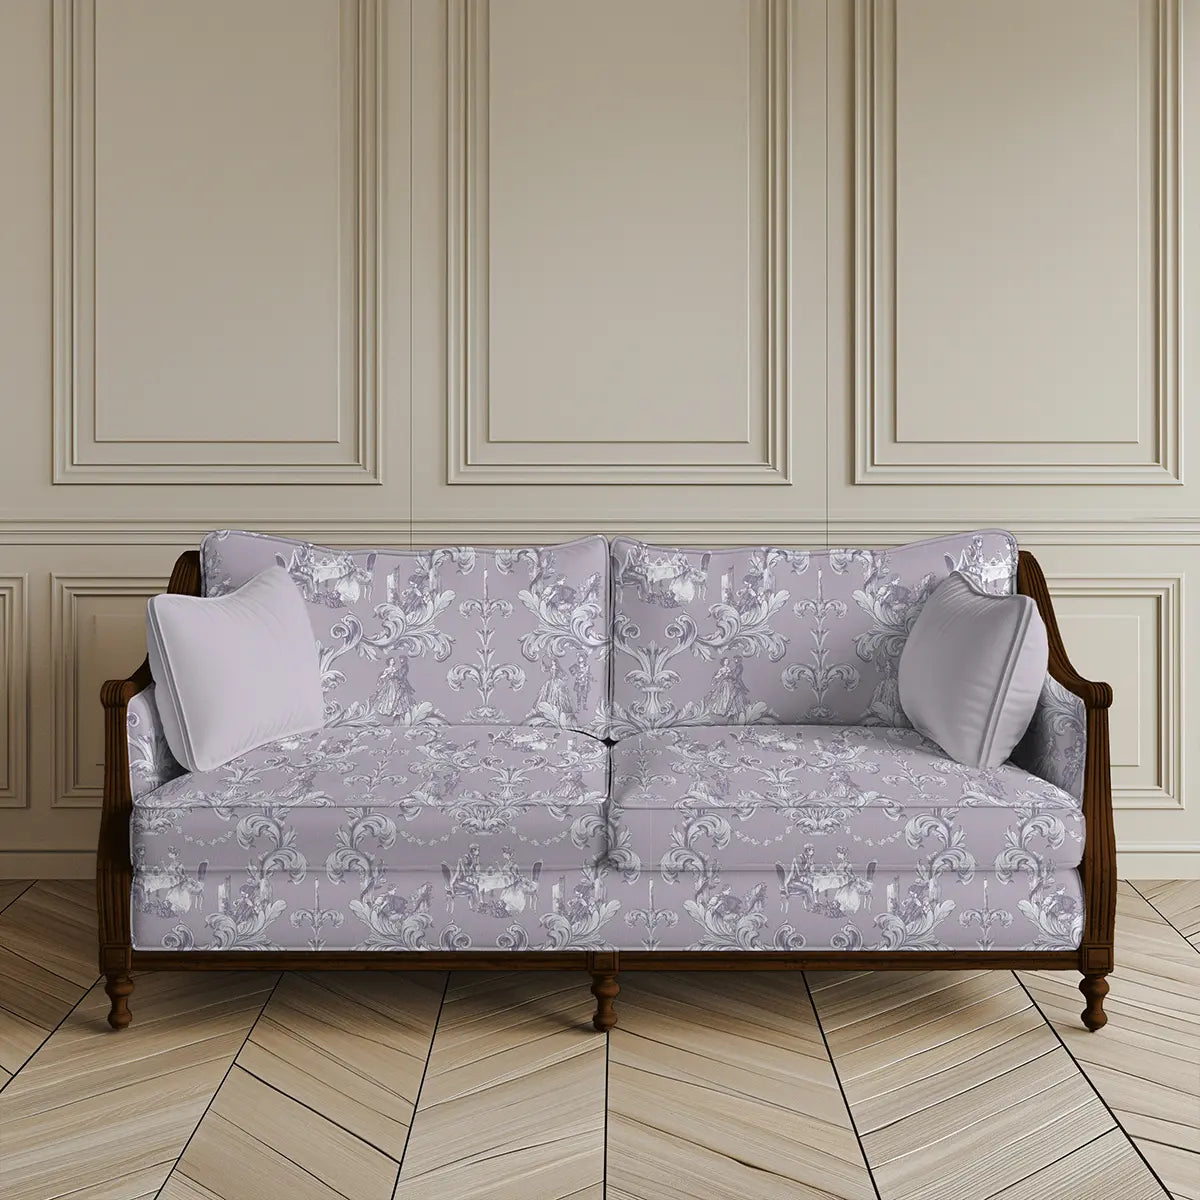 Buy Soothing Date, Sofa and Chairs Upholstery Fabric Lilac Color